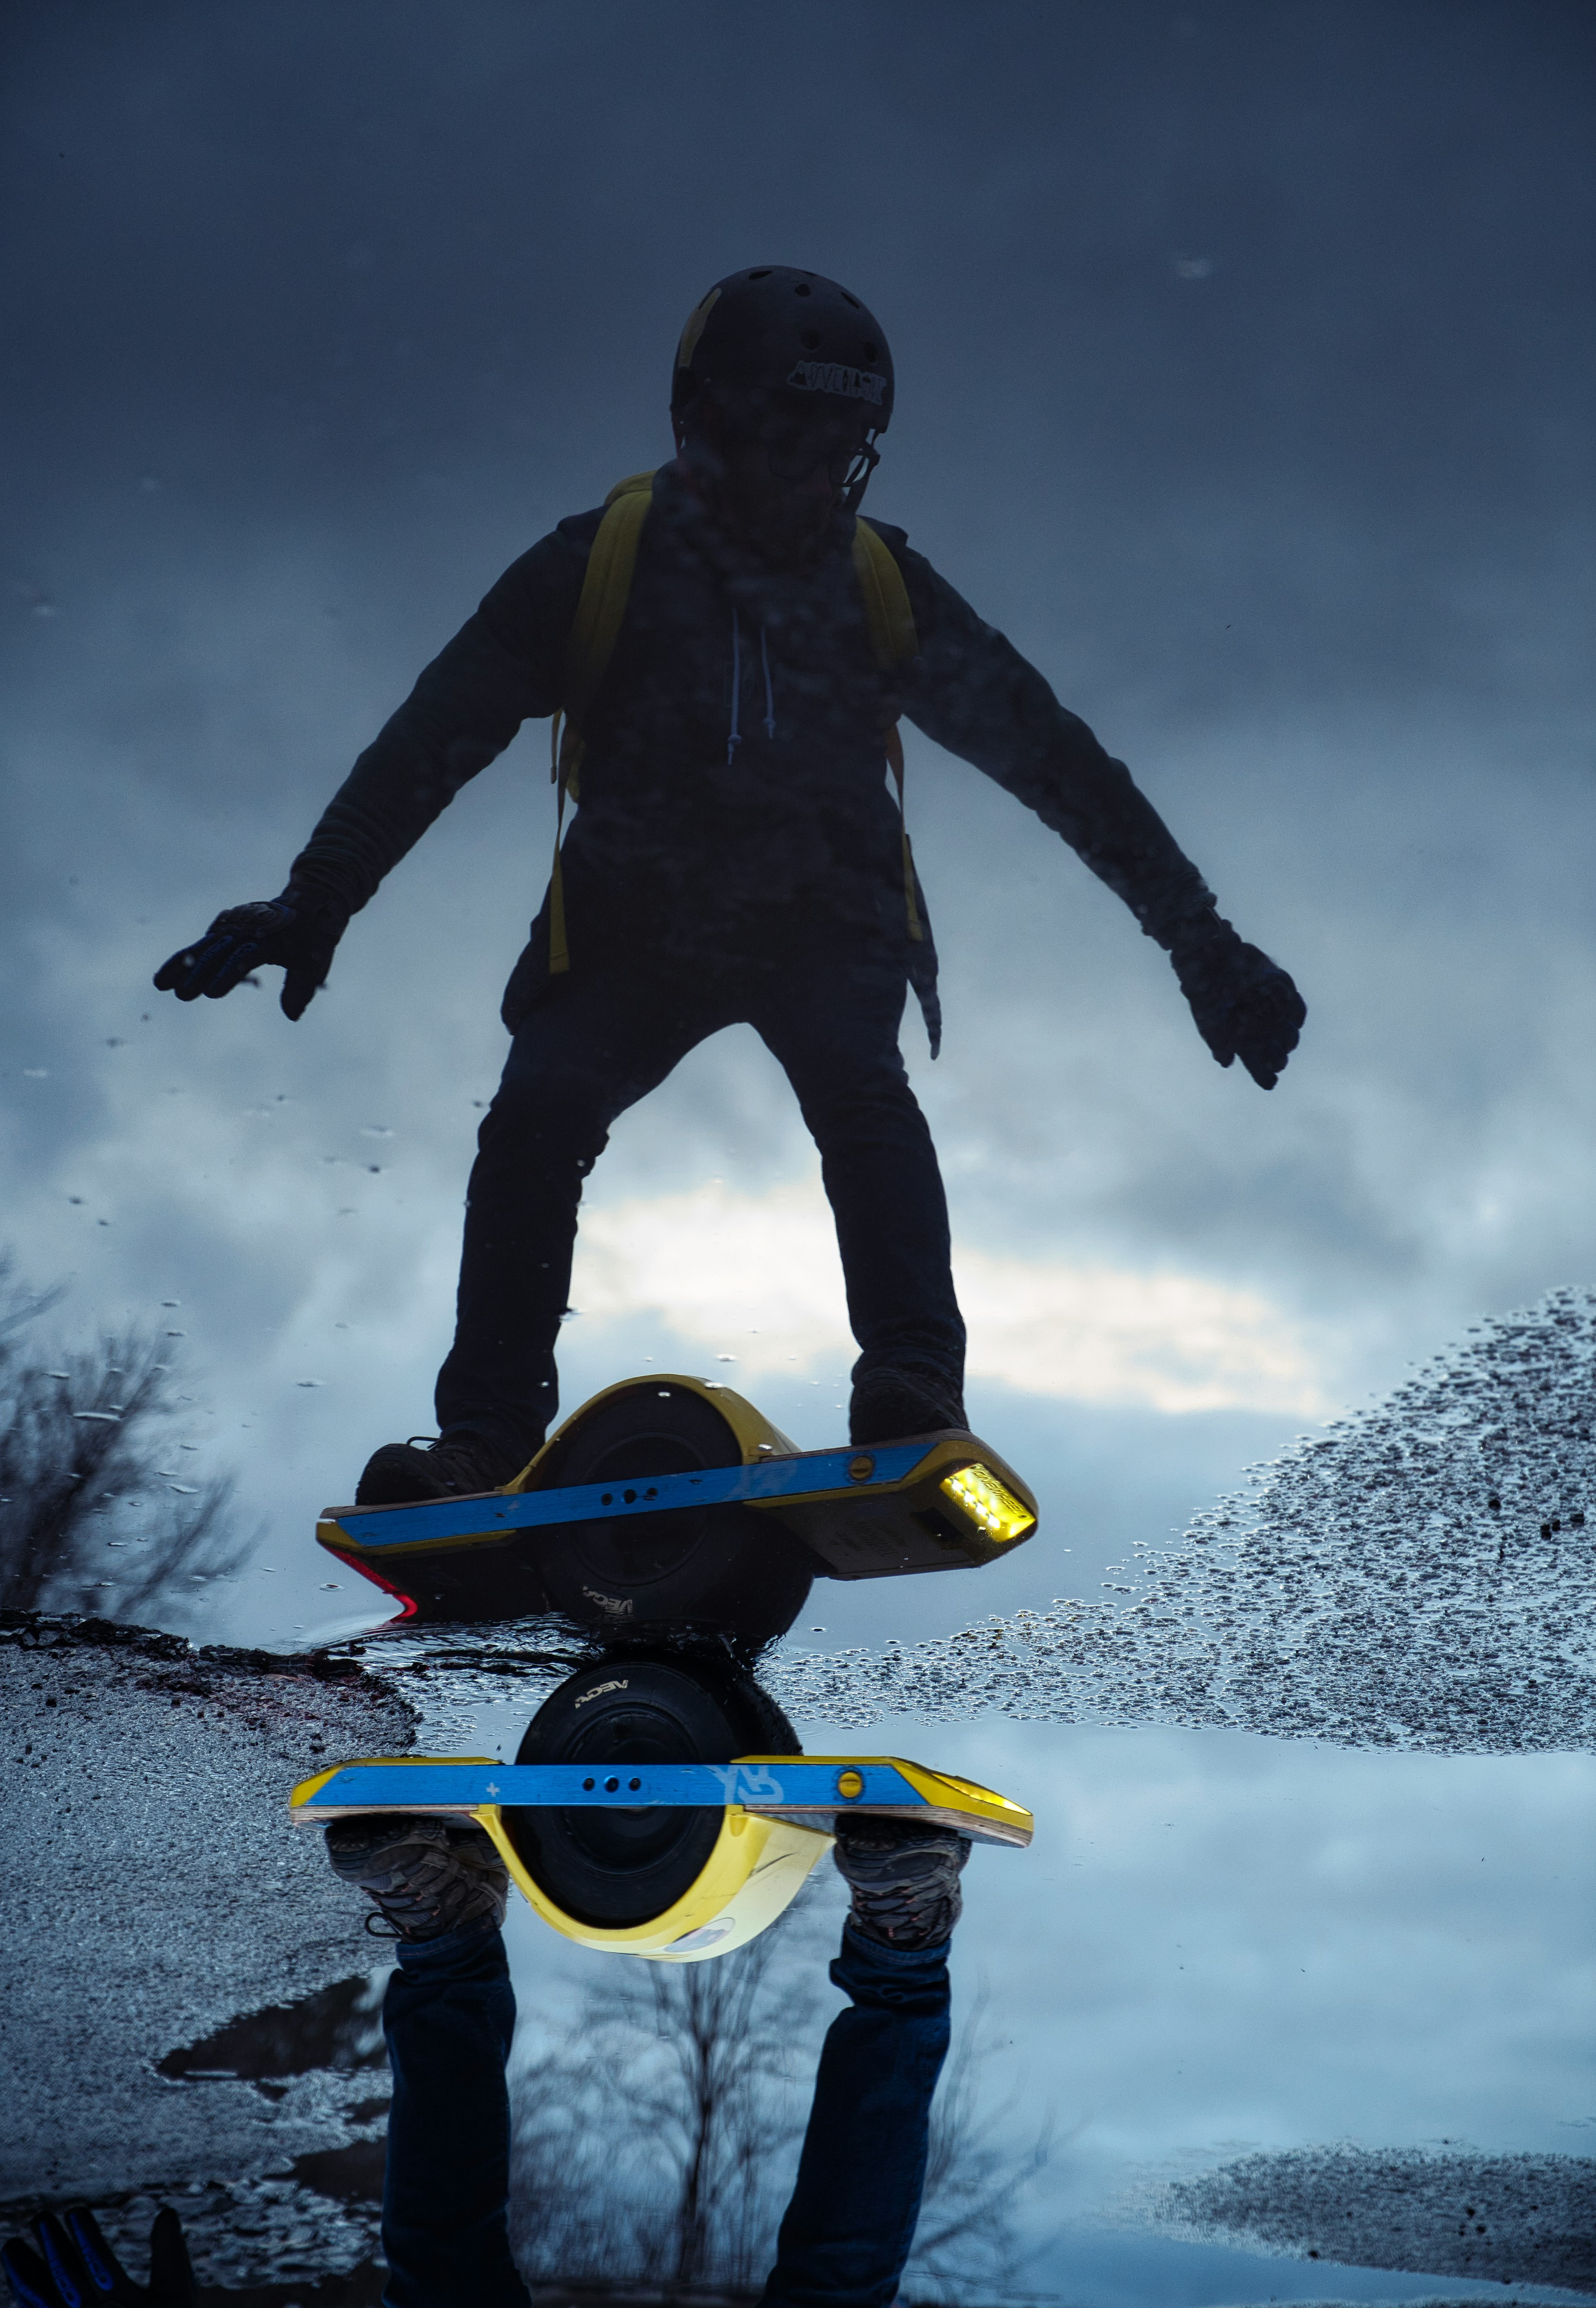 man in black jacket and blue denim jeans riding blue and yellow snowboard during daytime